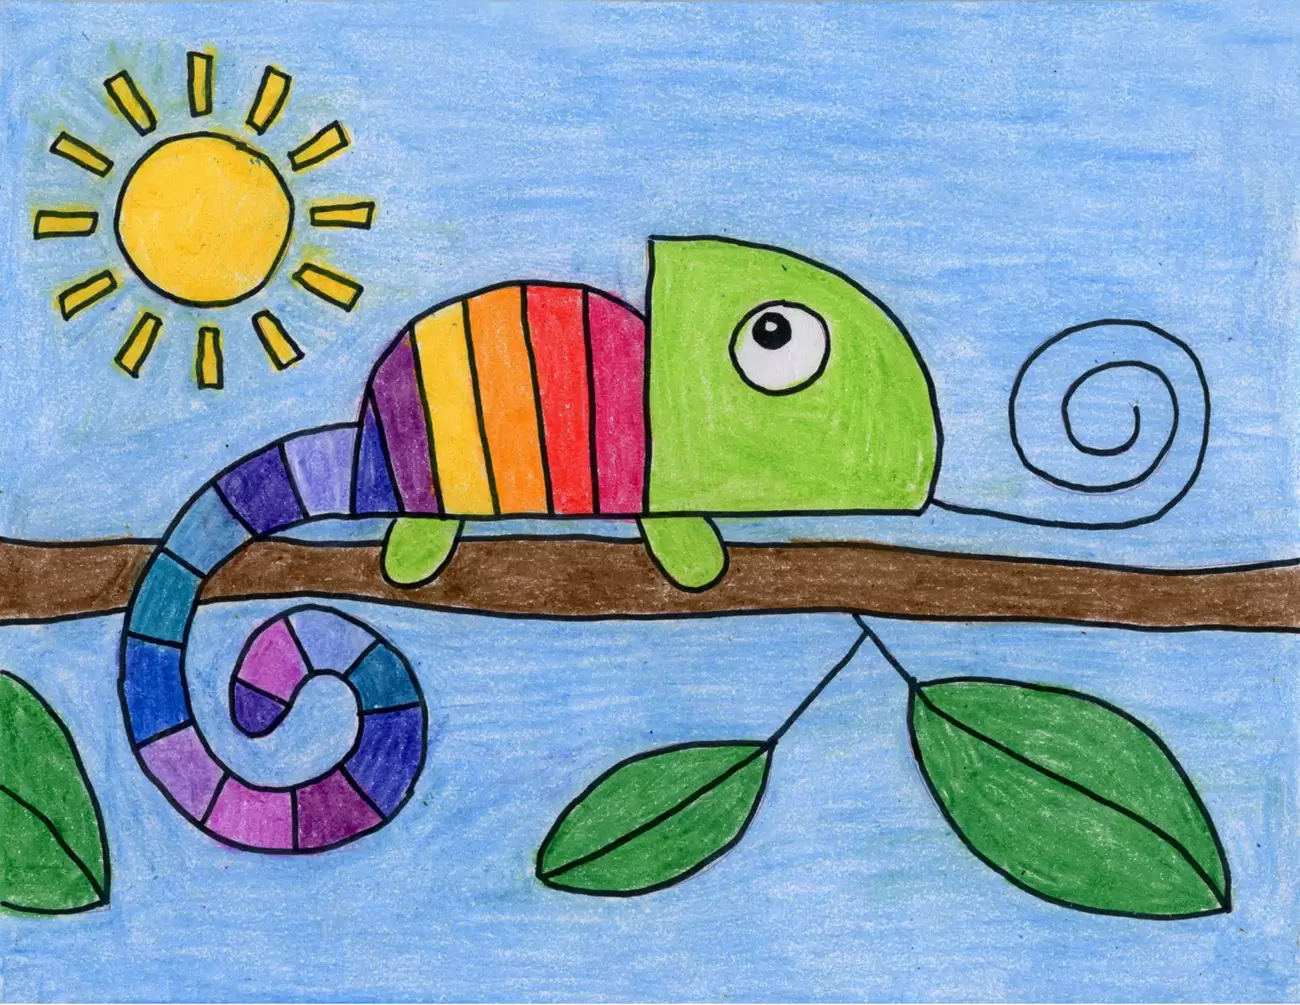 Easy How to Draw a Chameleon Tutorial Video and Chameleon Coloring Page